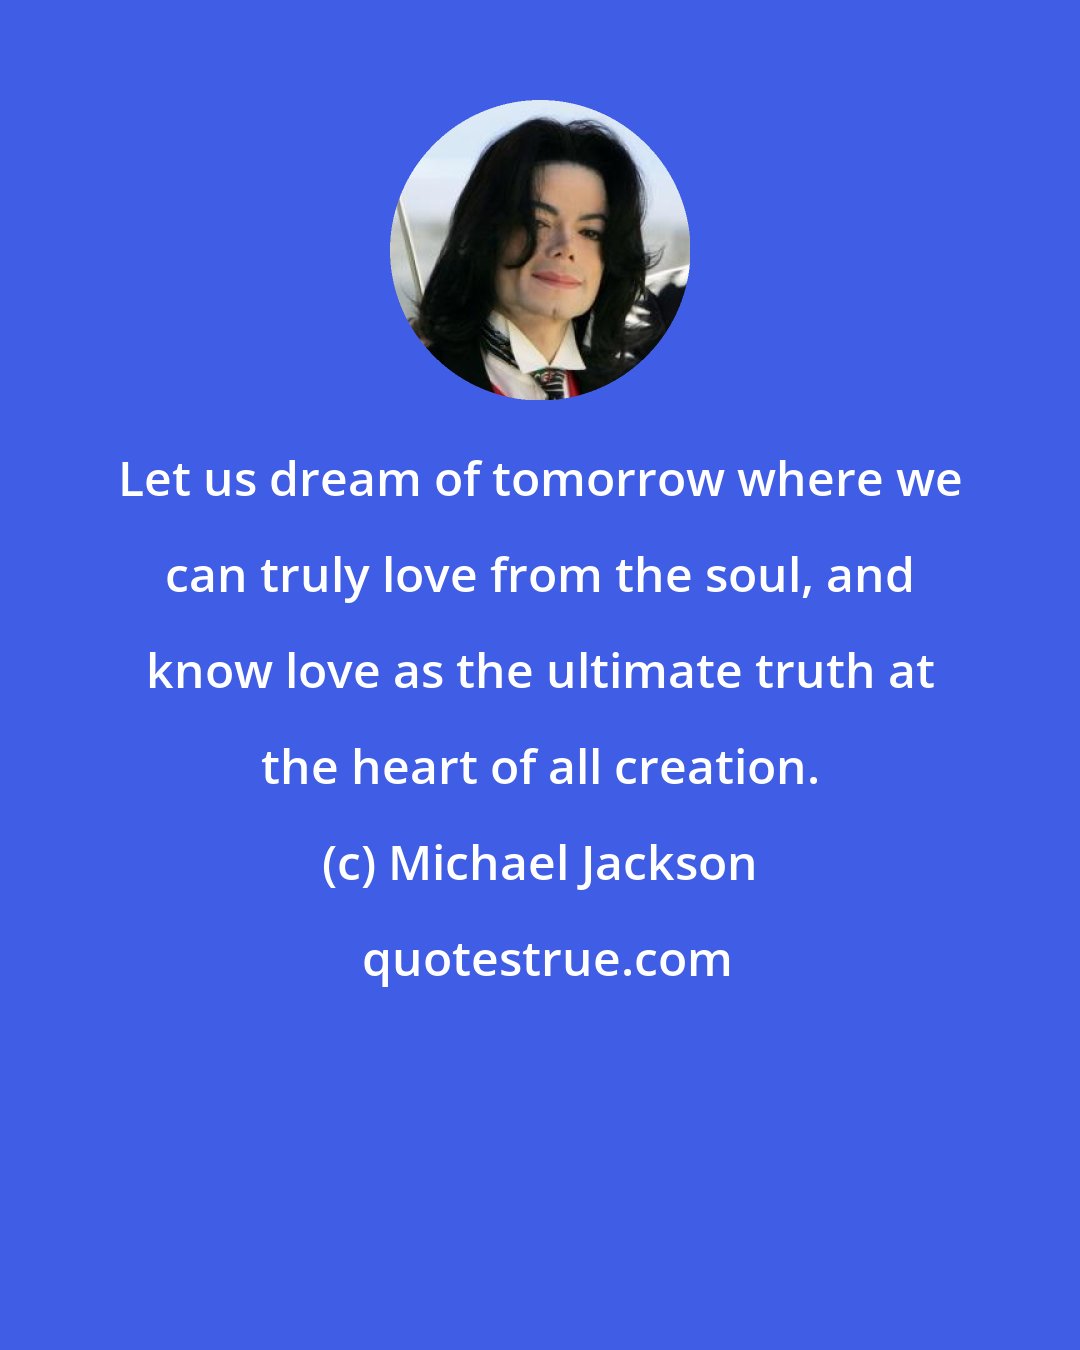 Michael Jackson: Let us dream of tomorrow where we can truly love from the soul, and know love as the ultimate truth at the heart of all creation.